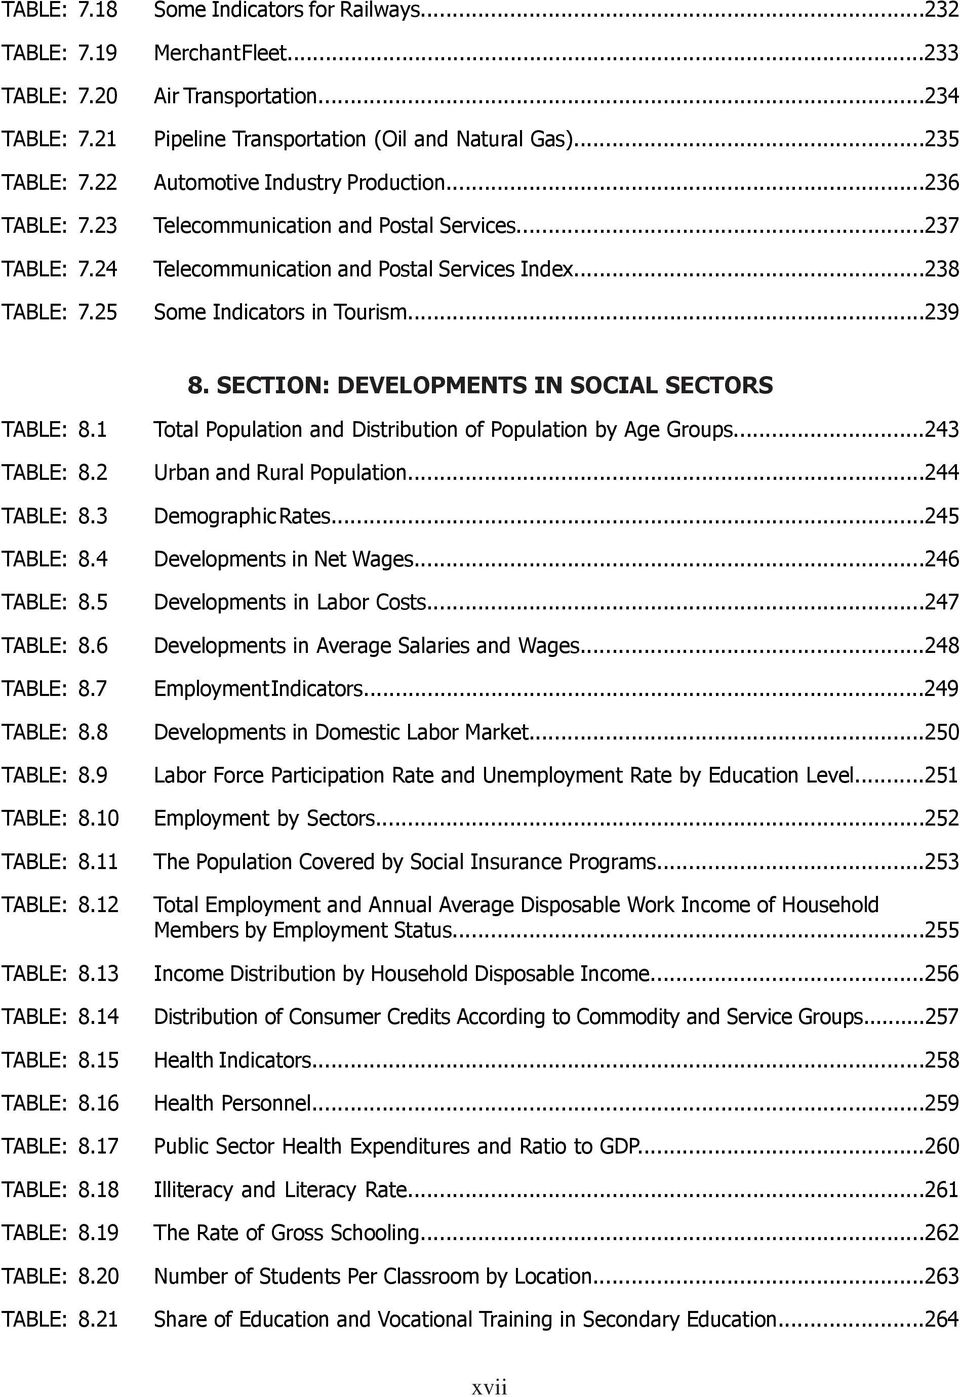 ..238 Some Indicators in Tourism...239 8. SECTION: DEVELOPMENTS IN SOCIAL SECTORS TABLE: 8.1 TABLE: 8.2 TABLE: 8.3 TABLE: 8.4 TABLE: 8.5 TABLE: 8.6 TABLE: 8.7 TABLE: 8.8 TABLE: 8.9 TABLE: 8.